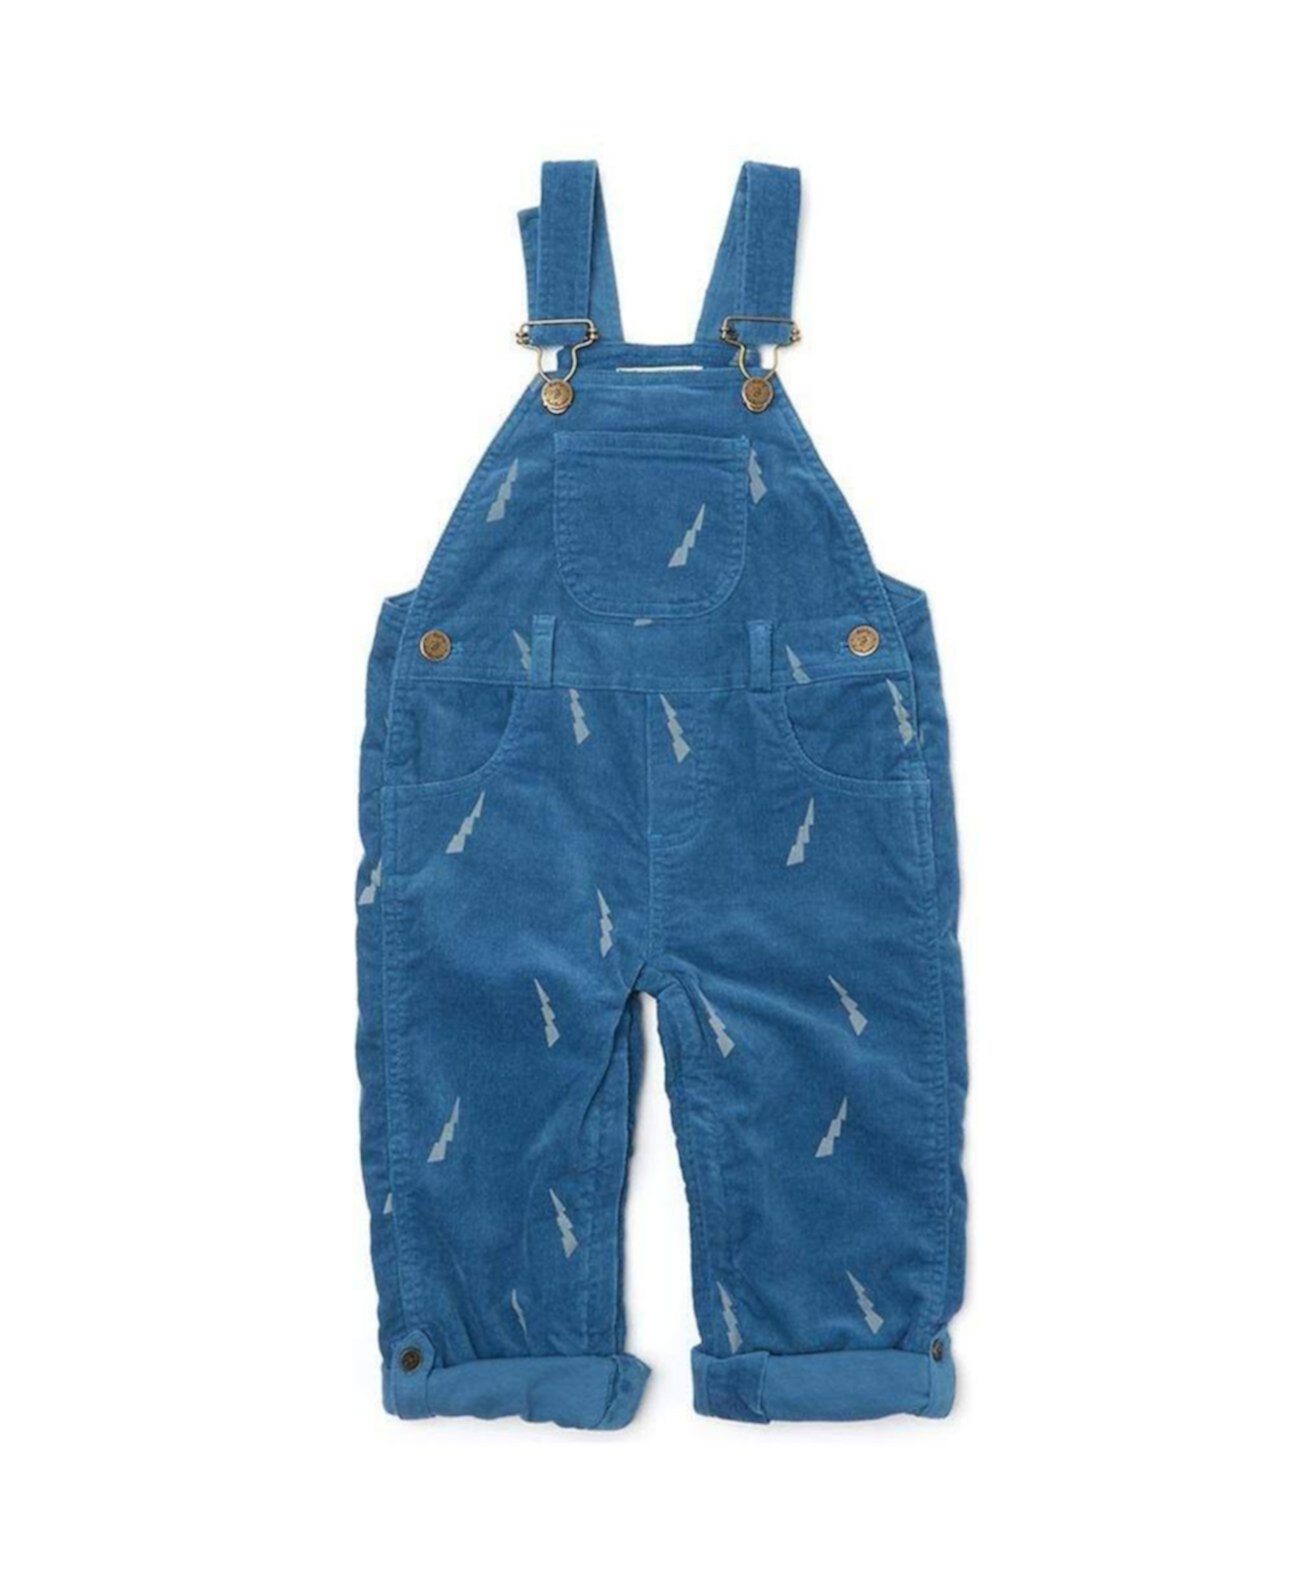 Toddler Girl and Toddler Boy Lightning Corduroy Overalls Dotty Dungarees